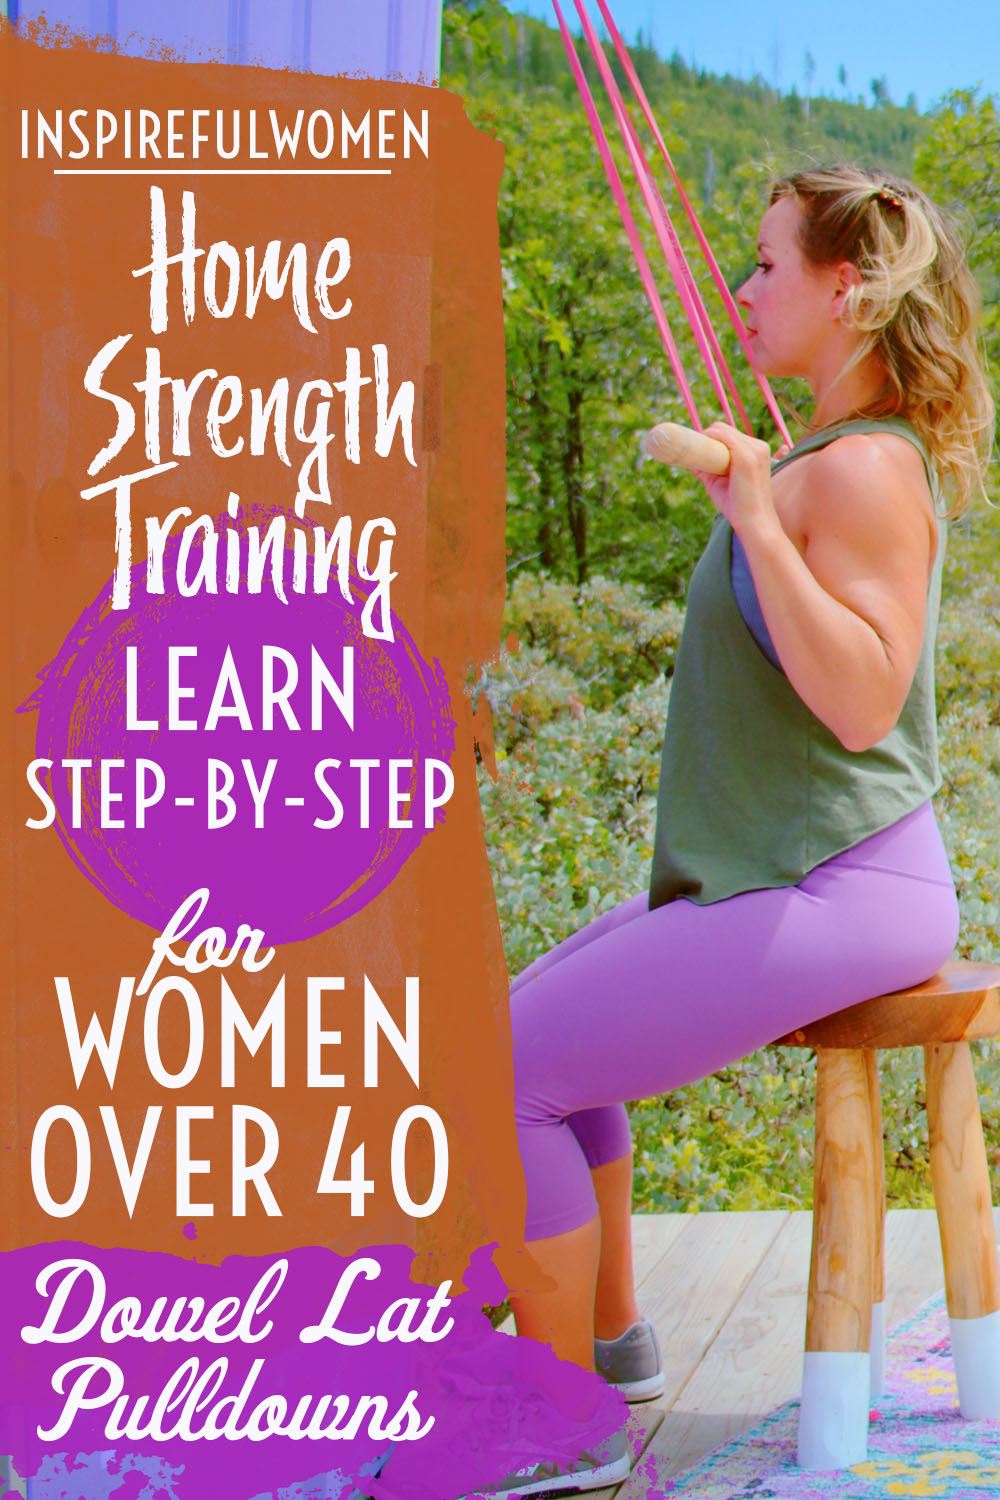 dowel-banded-lat-pulldowns-latissimus-dorsi-resistance-band-home-back-strength-exercise-women-40+